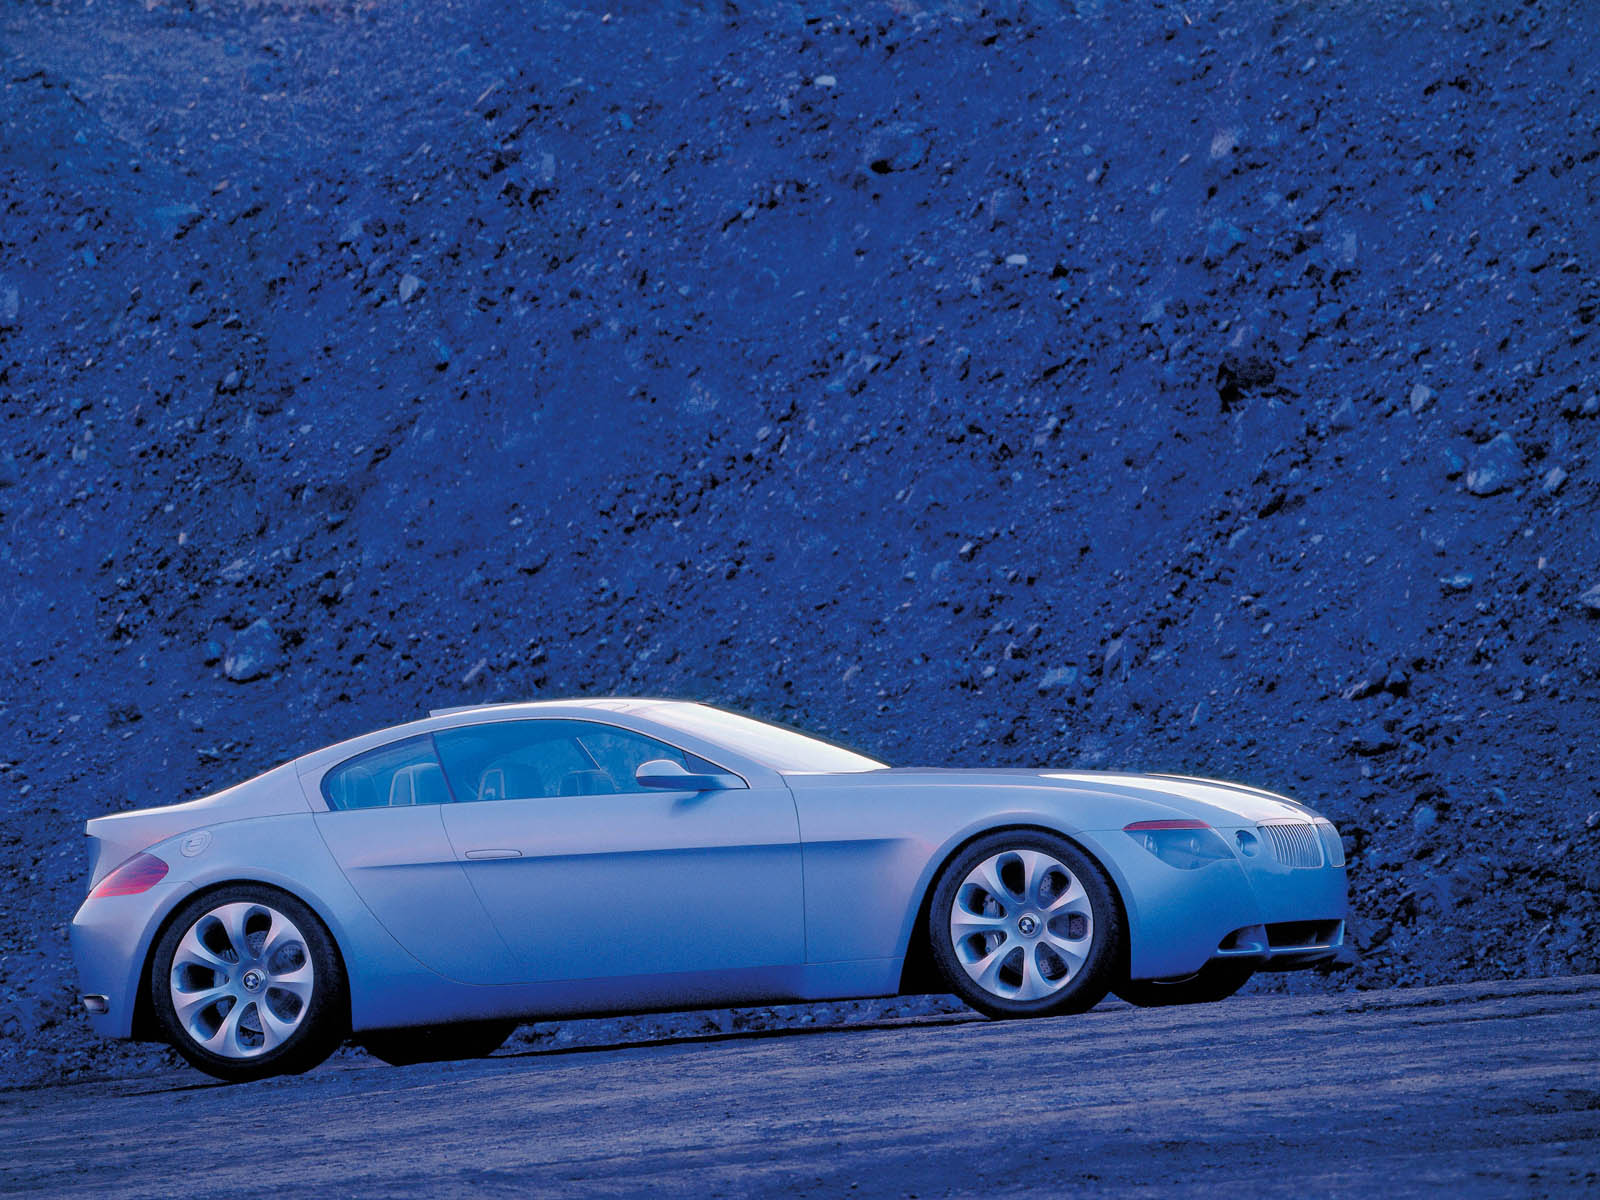 You can vote for this BMW Z9 photo